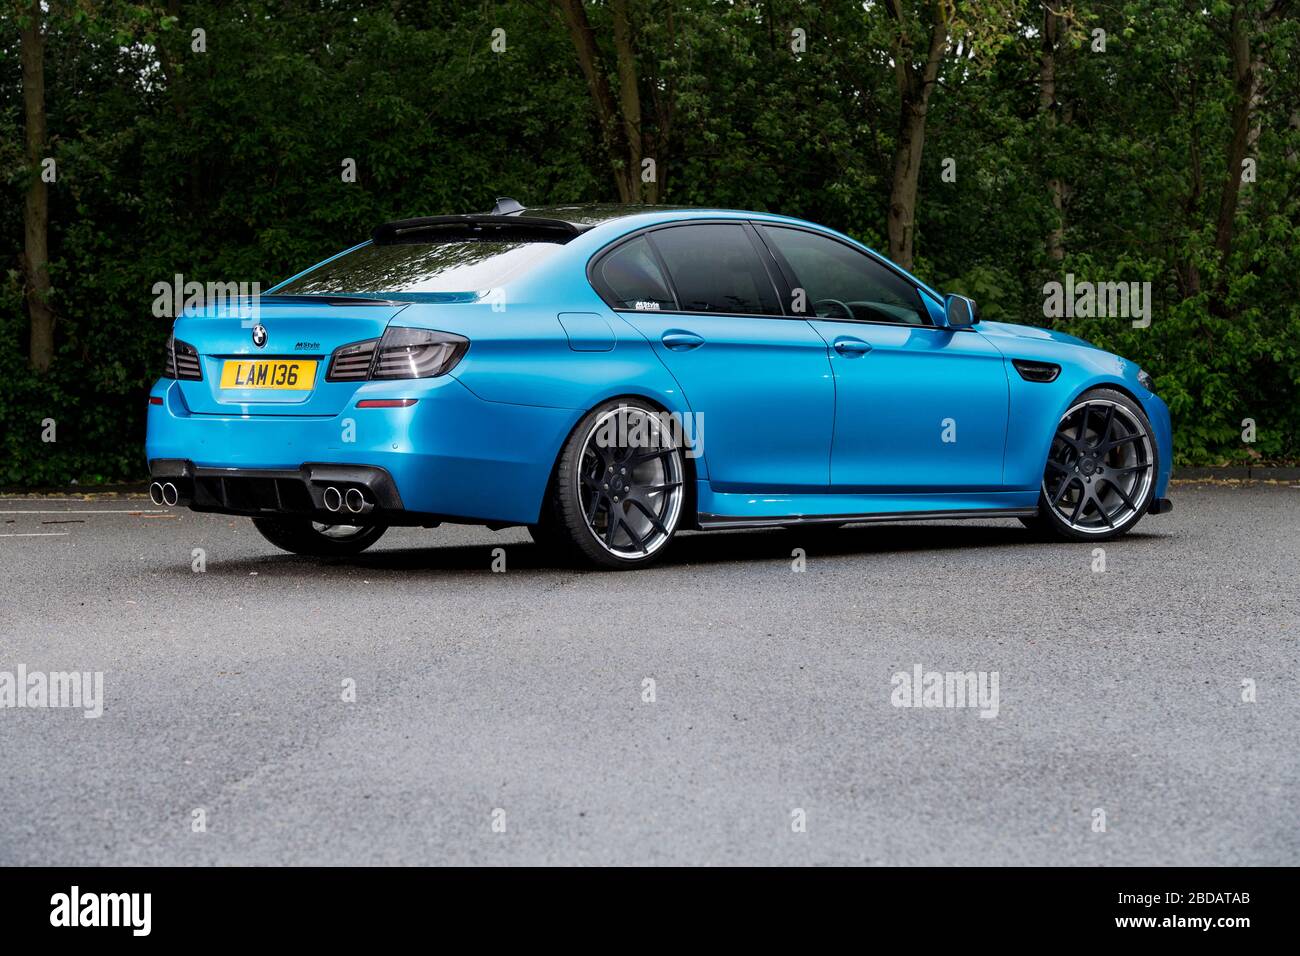 2015 F10 BMW 520d 5 Series, modified large saloon Stock Photo